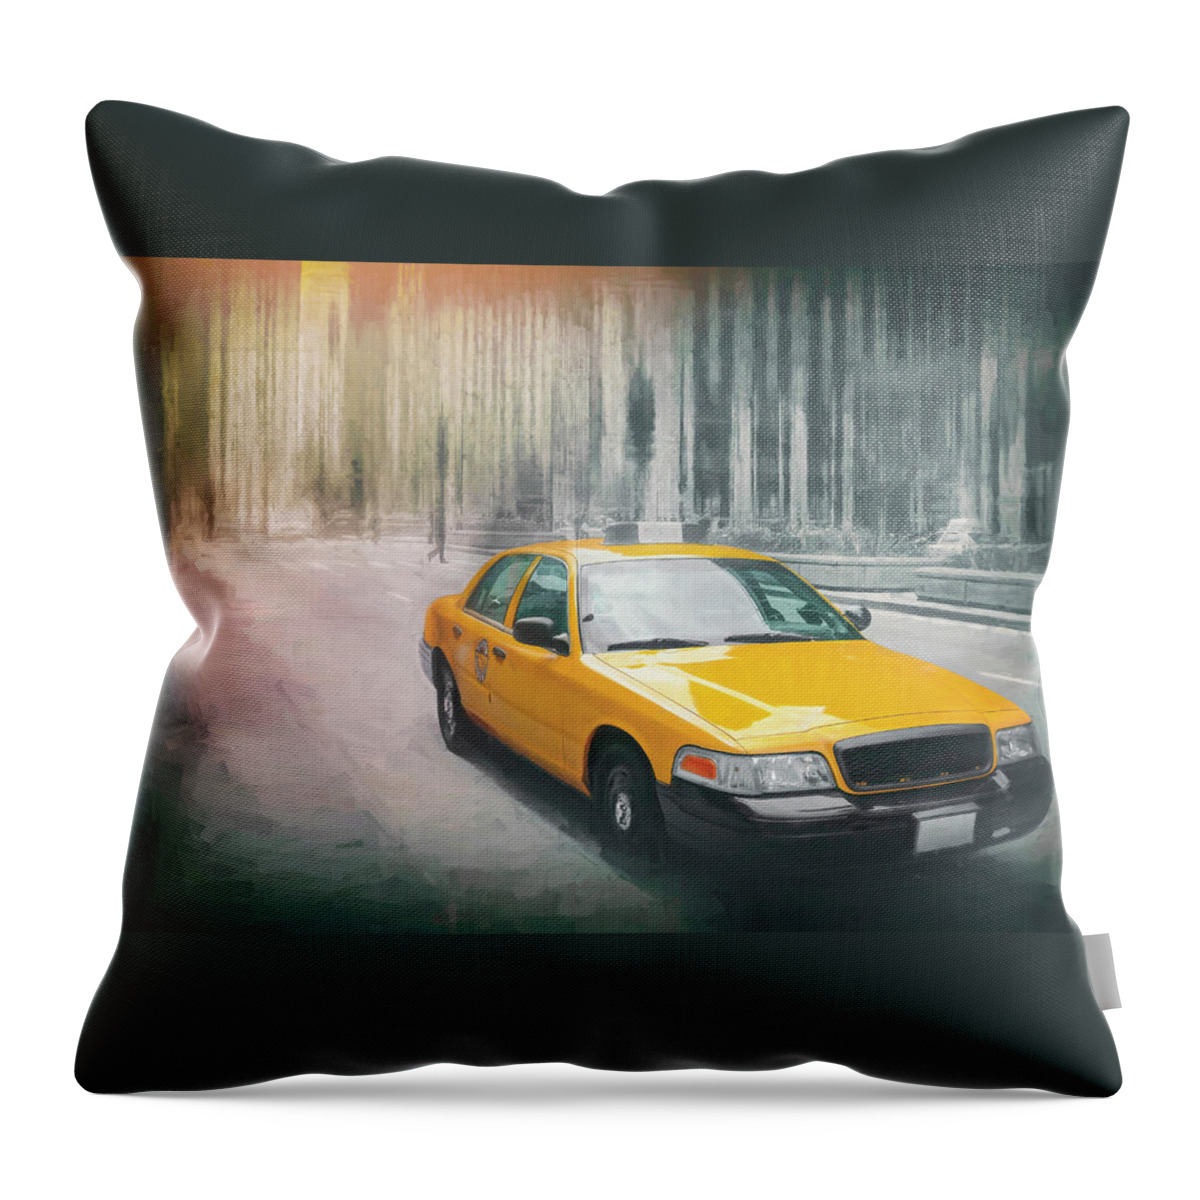 Chicago Throw Pillow featuring the photograph Yellow Taxi Cab Downtown Chicago by Carol Japp